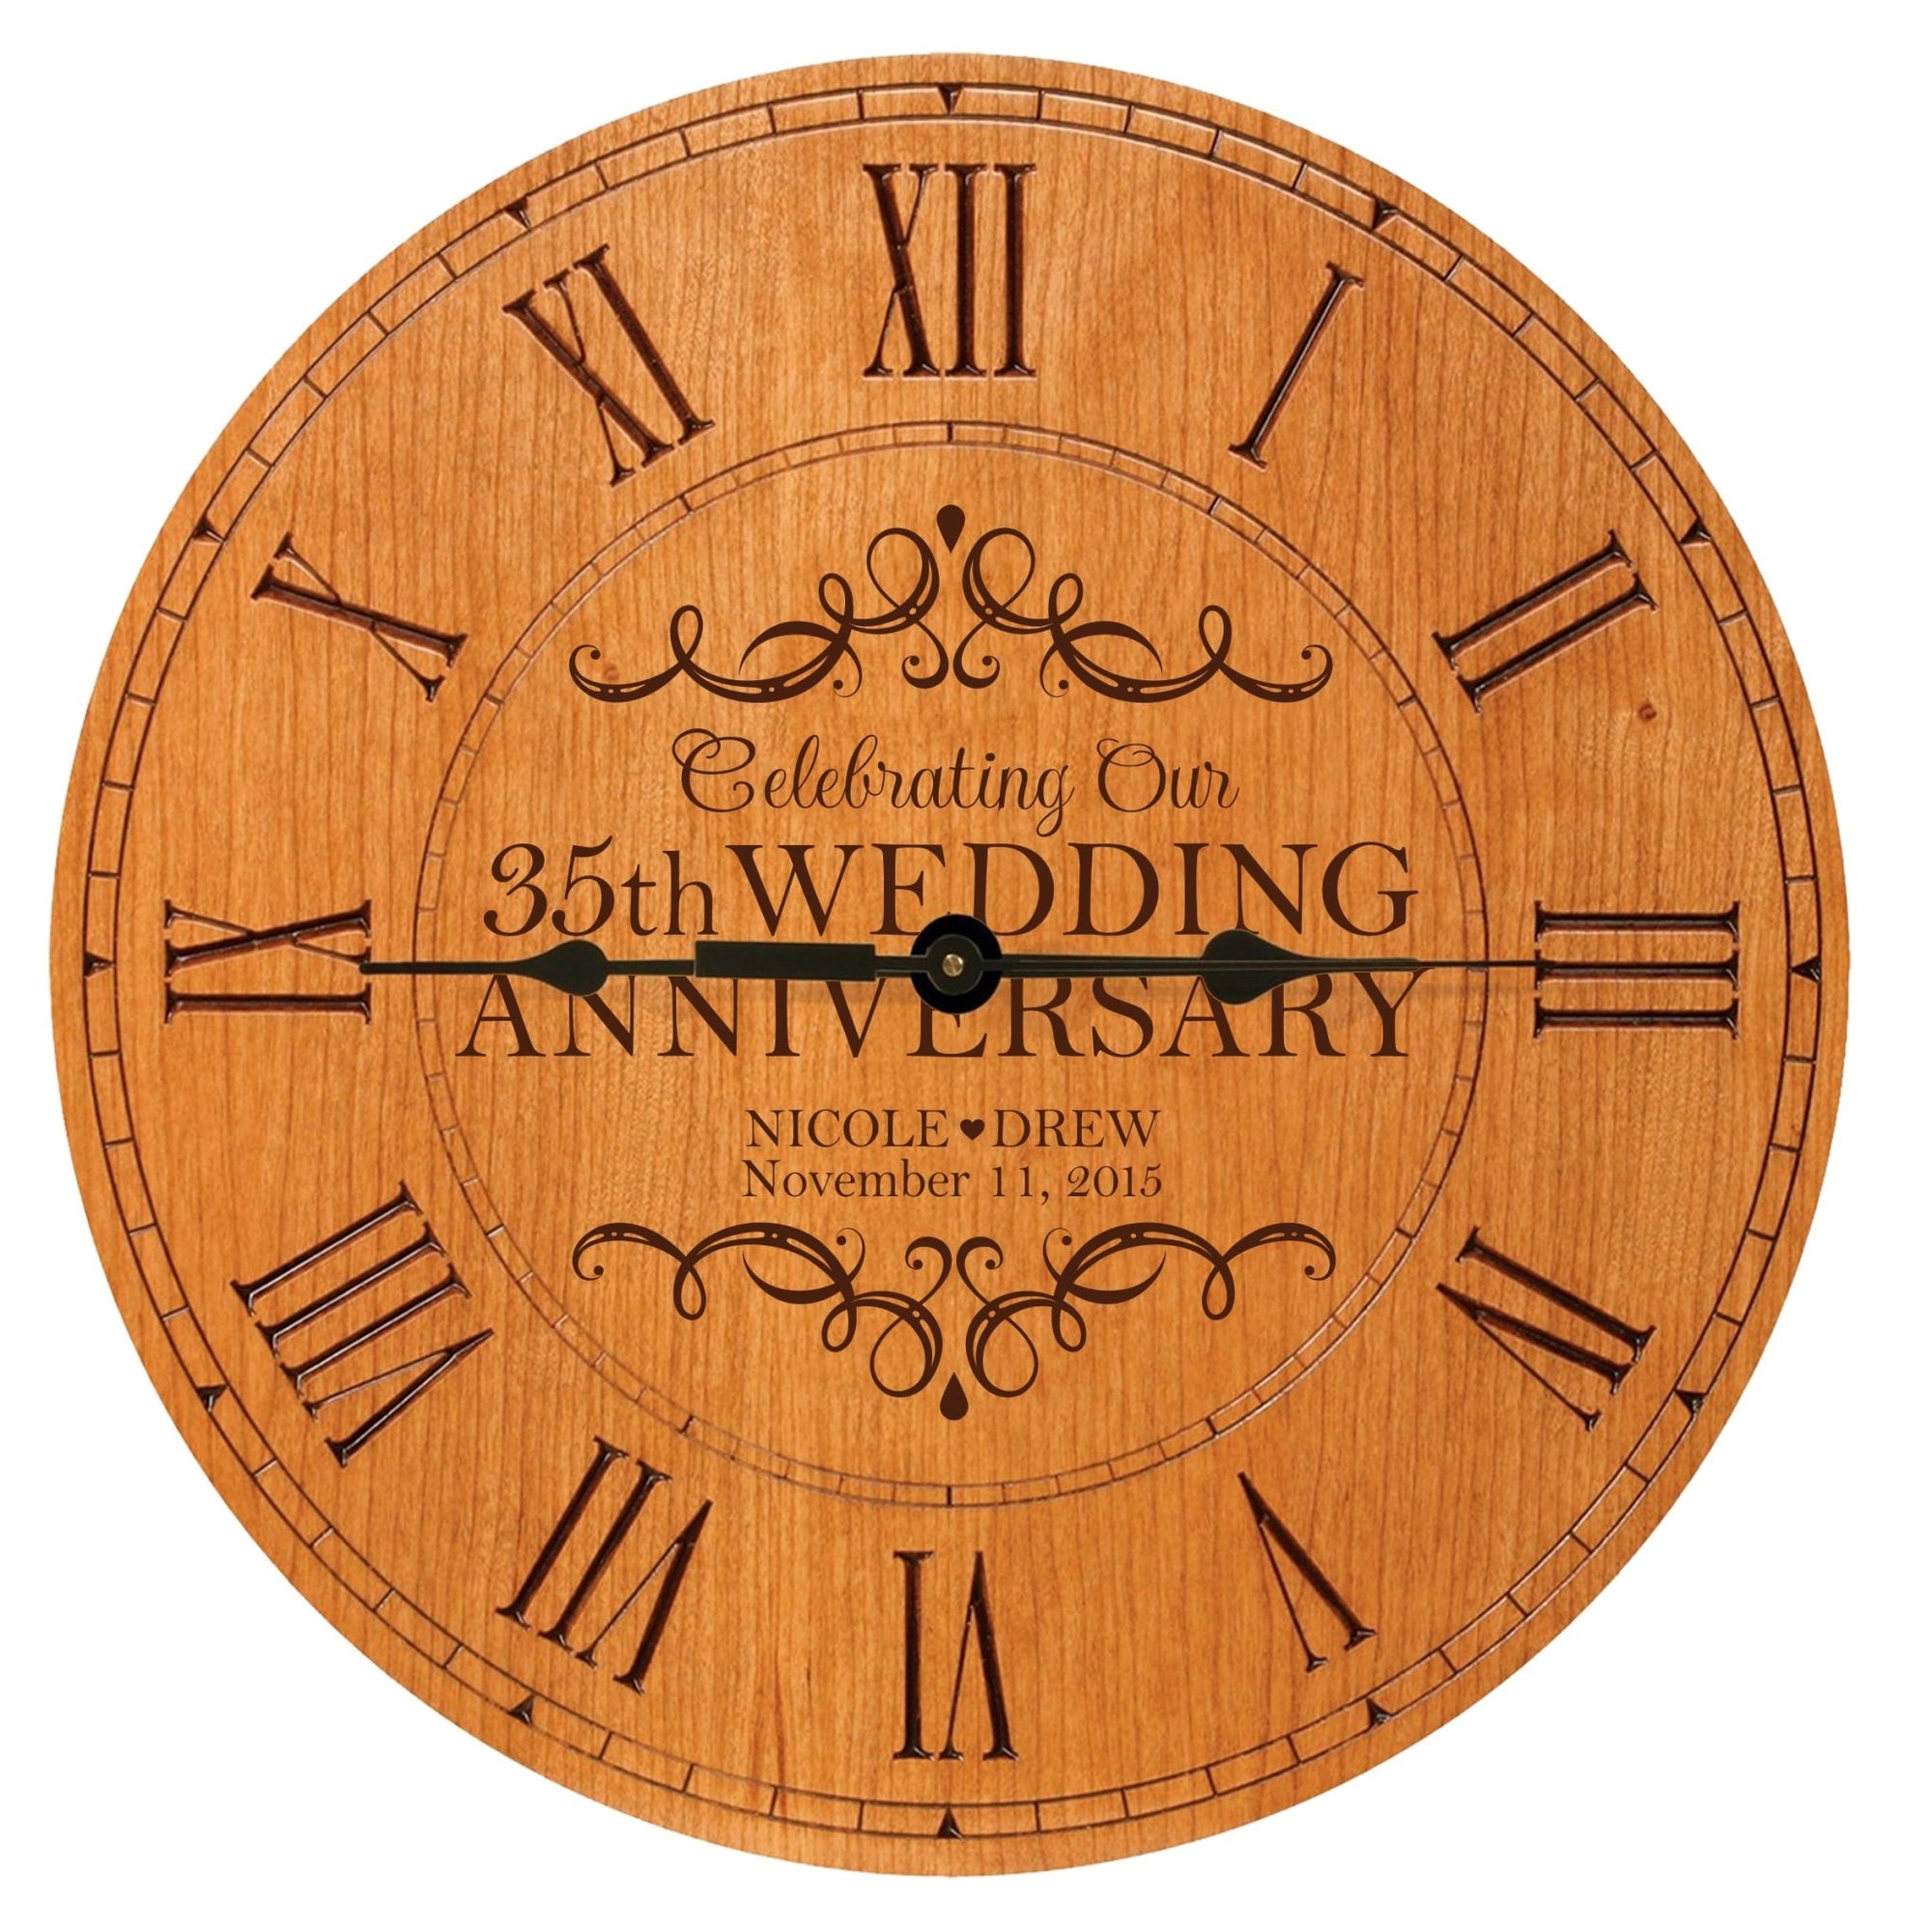 Lifesong Milestones Personalized Engraved Wooden Wall Clock for 35th Wedding Anniversary Gift Ideas